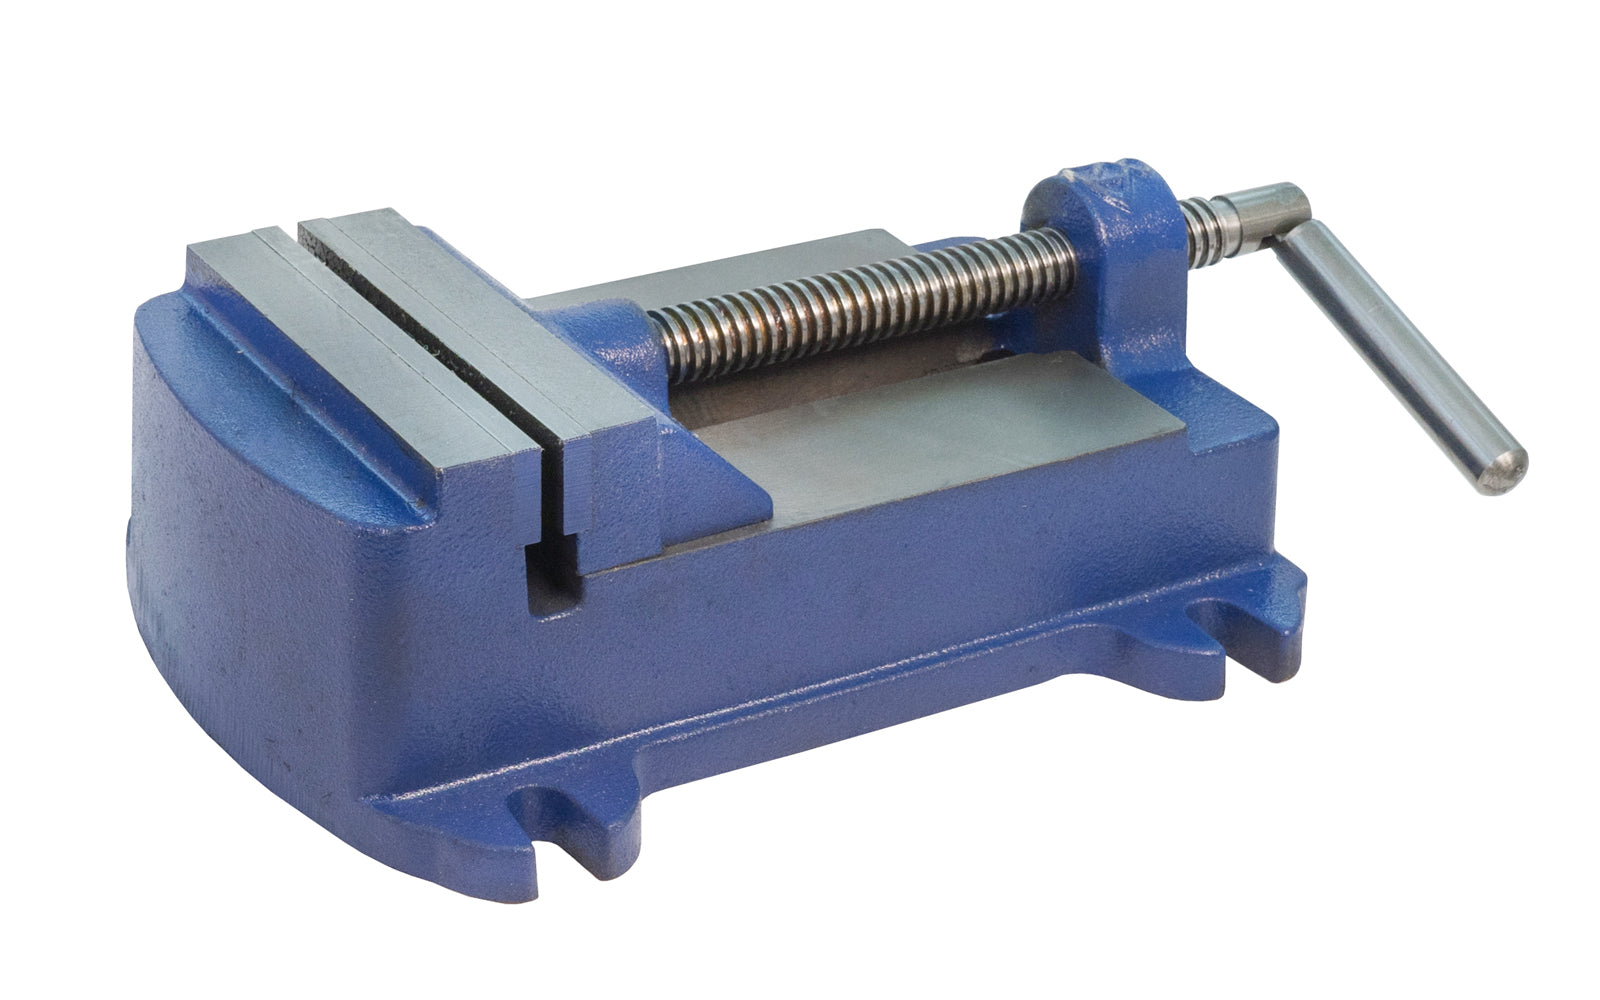 Eron Japanese 6" Drill Press Vise - E-103-6. Main screw with acme thread for smooth operation & allows for powerful clamping. 6" jaw width.  Made in Japan.